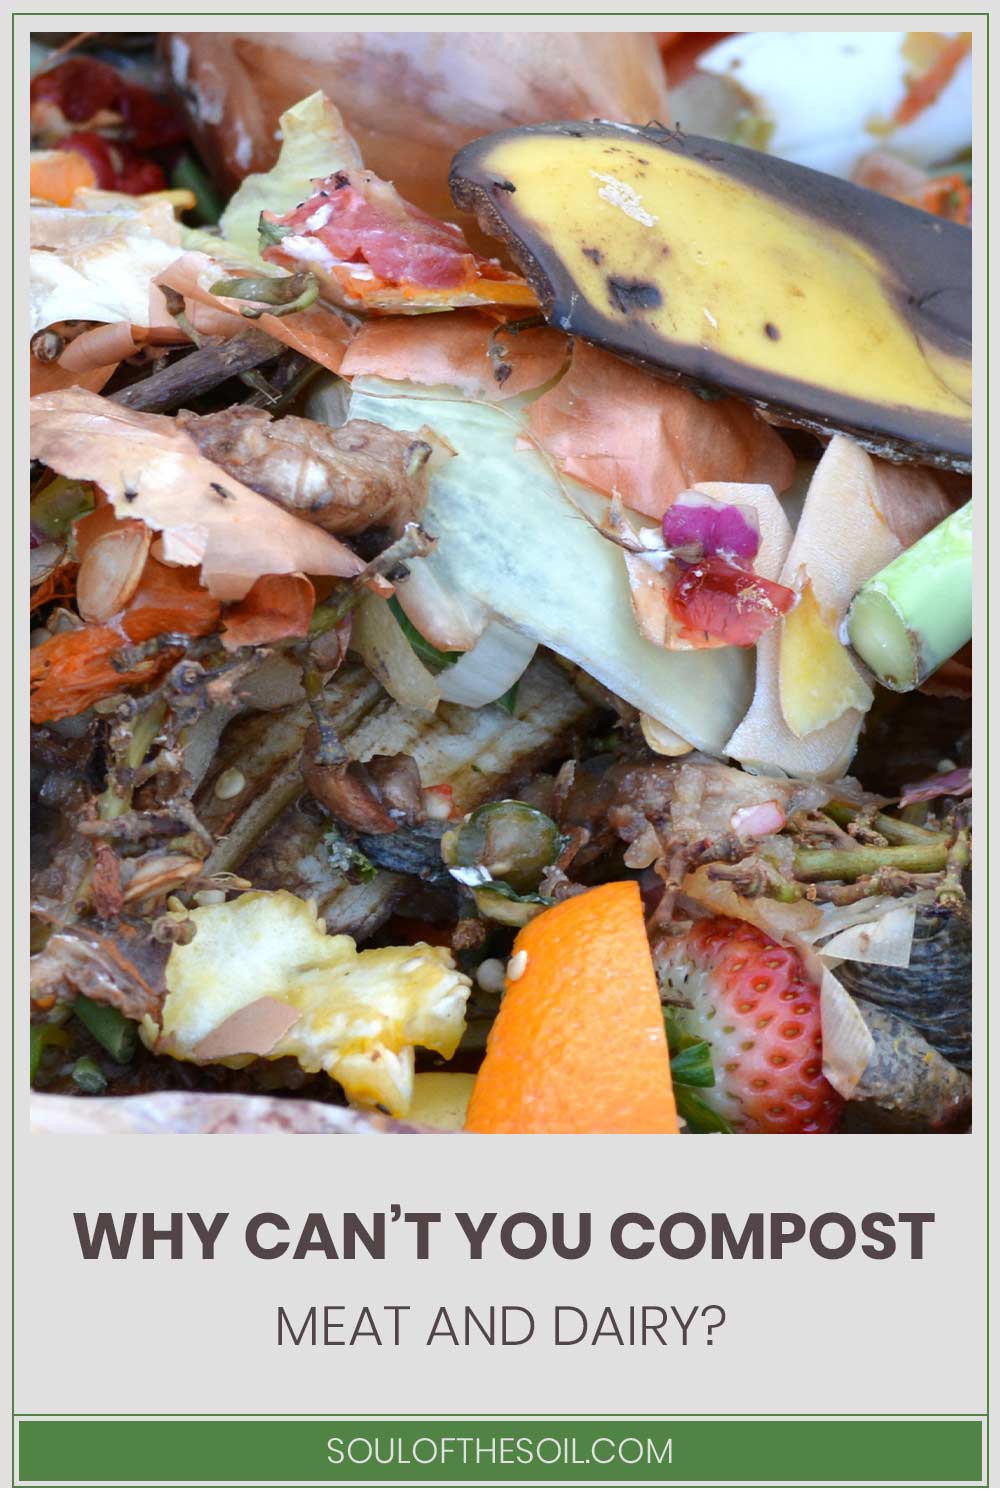 Why Can’t You Compost Meat And Dairy?